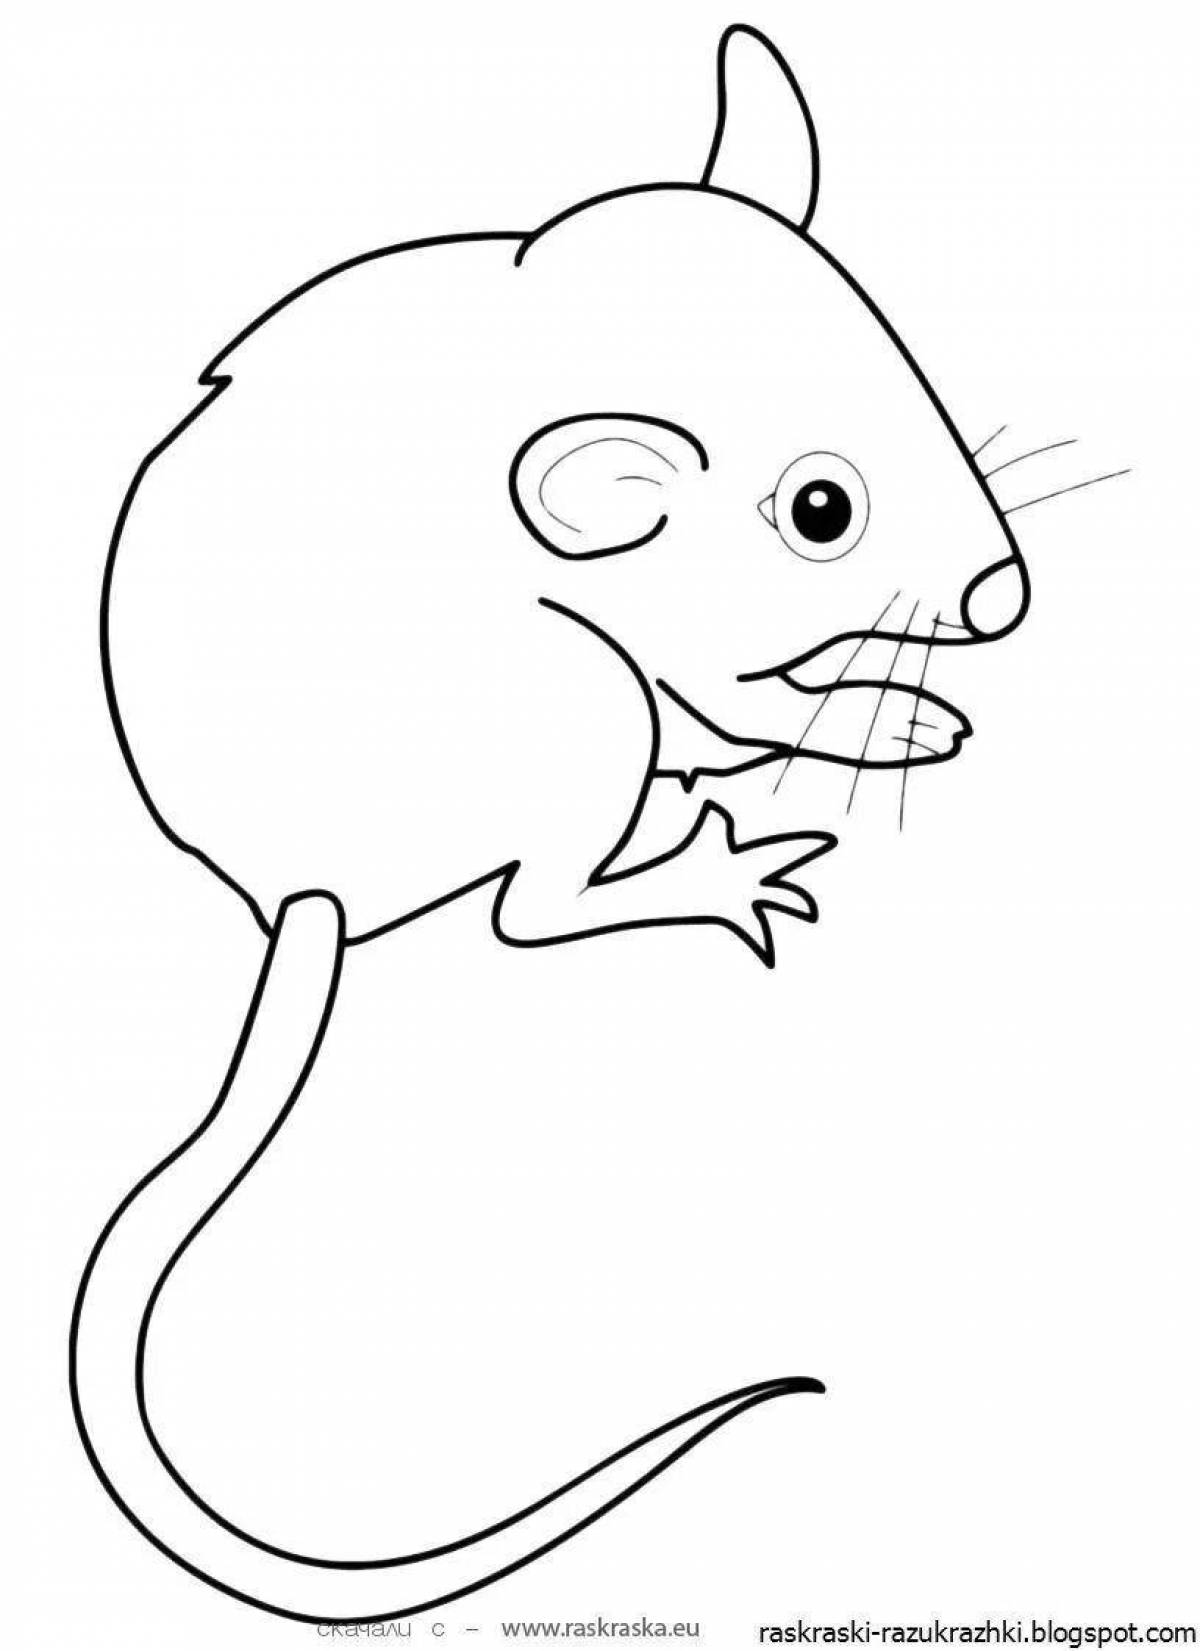 Bright mouse drawing